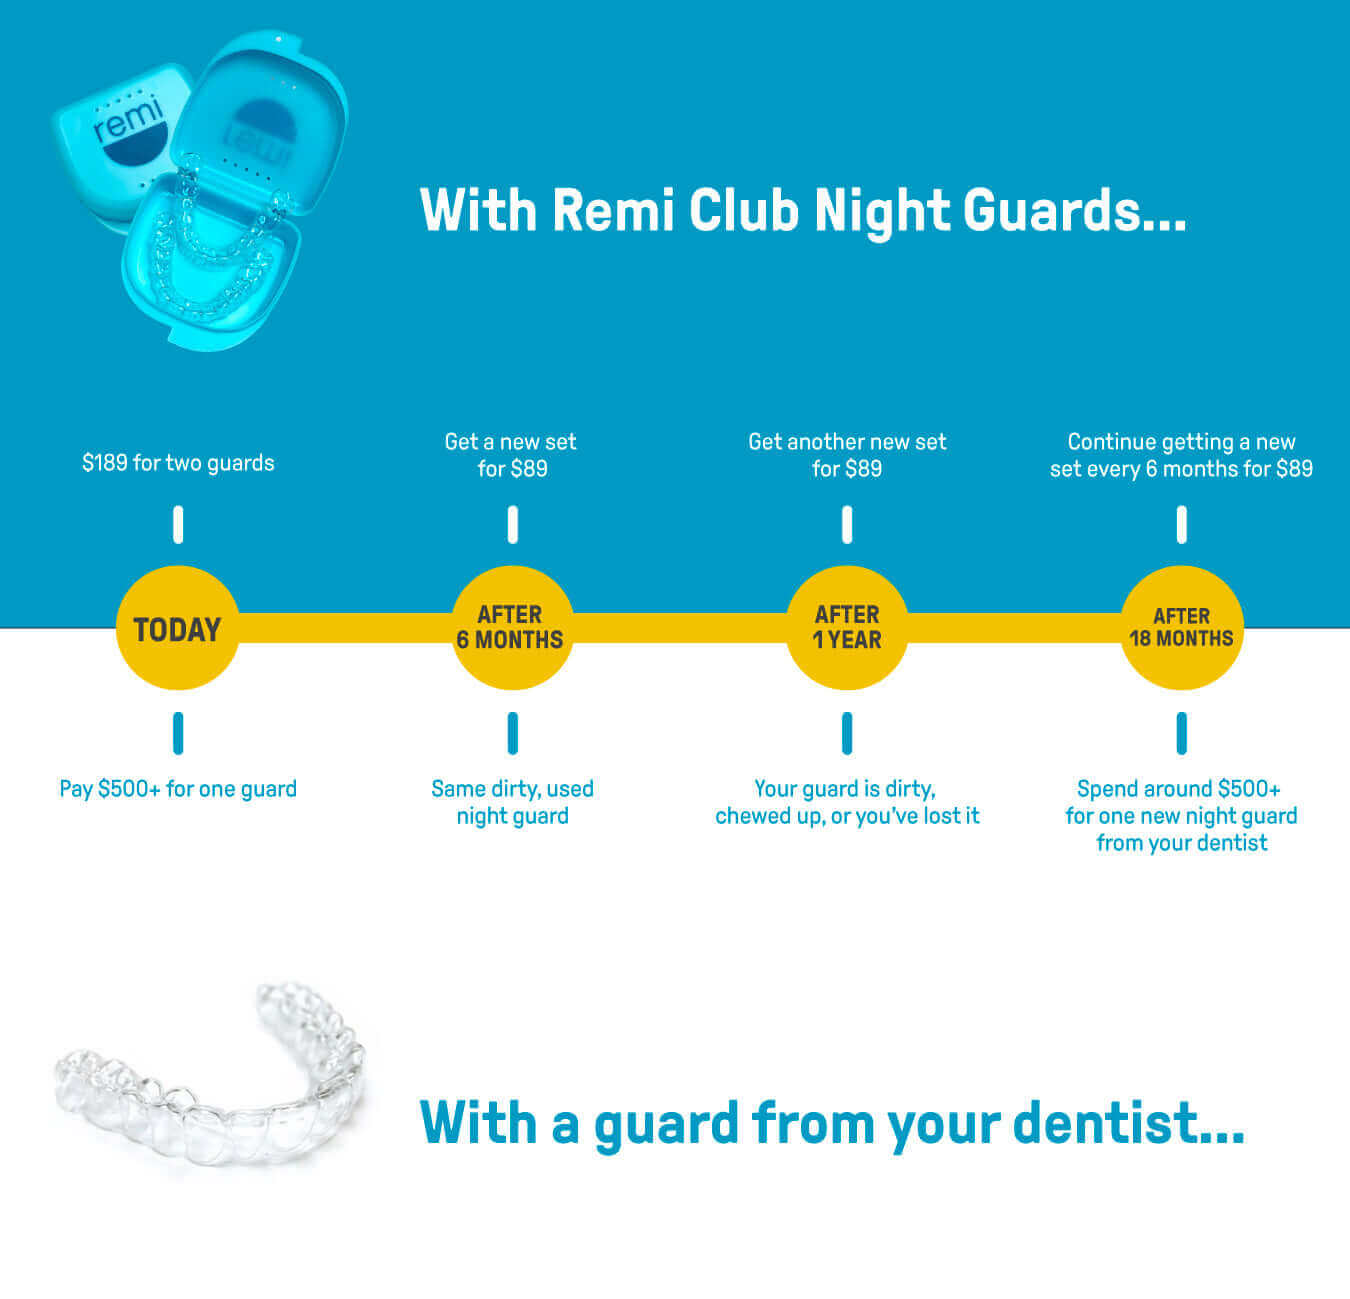 Comparison infographic showing the cost and benefits of Custom Night Guards versus traditional dental guards over 18 months. Custom Night Guards offer new dental-grade night guards at specific intervals for less cost, helping to reduce jaw pain more effectively.